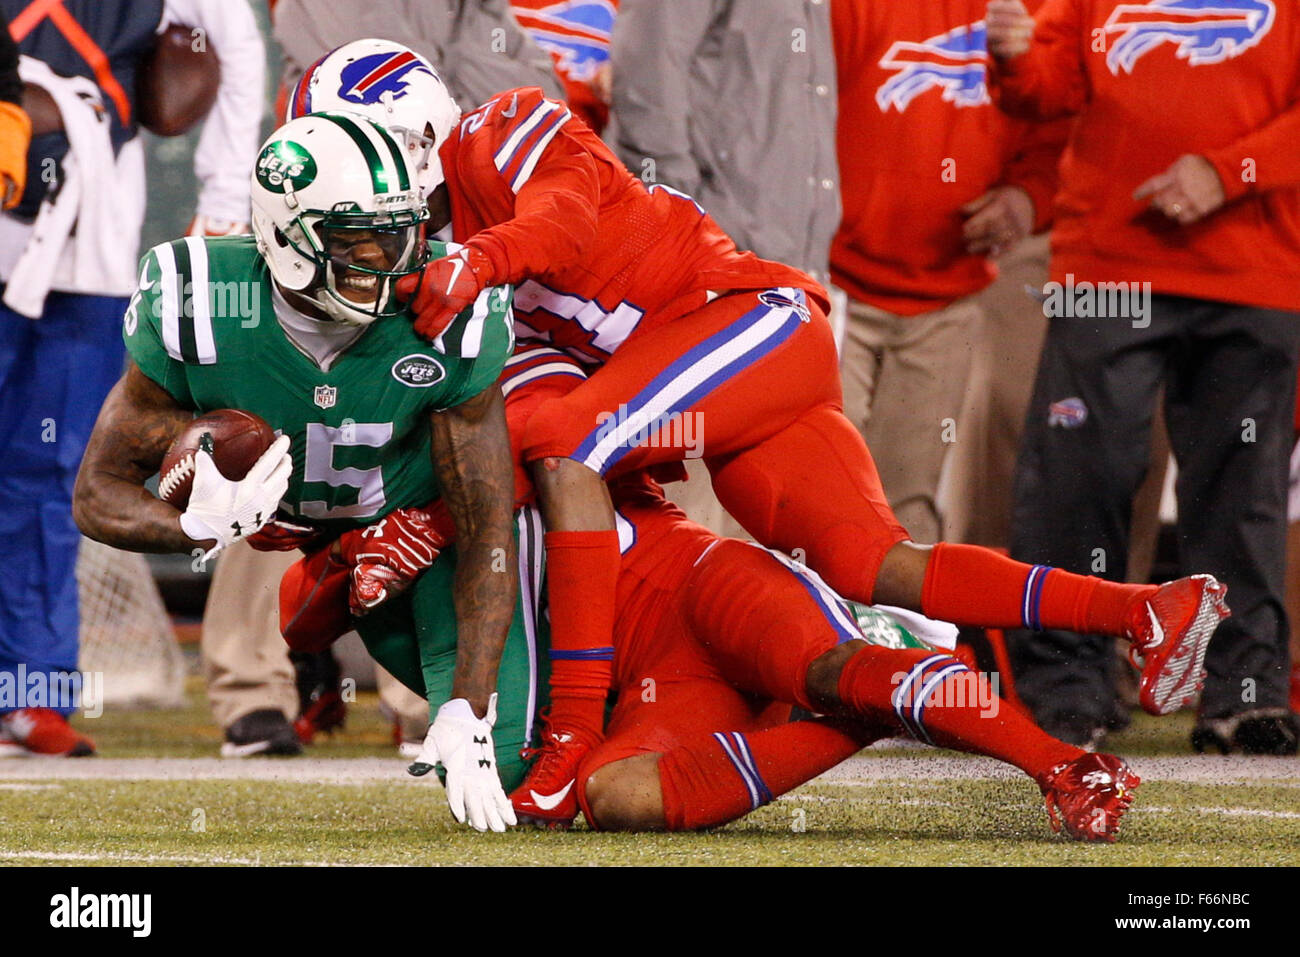 East Rutherford, New Jersey, USA. 12th Nov, 2015. New York Jets wide receiver Brandon Marshall (15) gets tackled by Buffalo Bills cornerback Leodis McKelvin (21) and cornerback Ronald Darby (28) after making the catch during the NFL game between the Buffalo Bills and the New York Jets at MetLife Stadium in East Rutherford, New Jersey. The Buffalo Bills won 22-17. Christopher Szagola/CSM/Alamy Live News Stock Photo